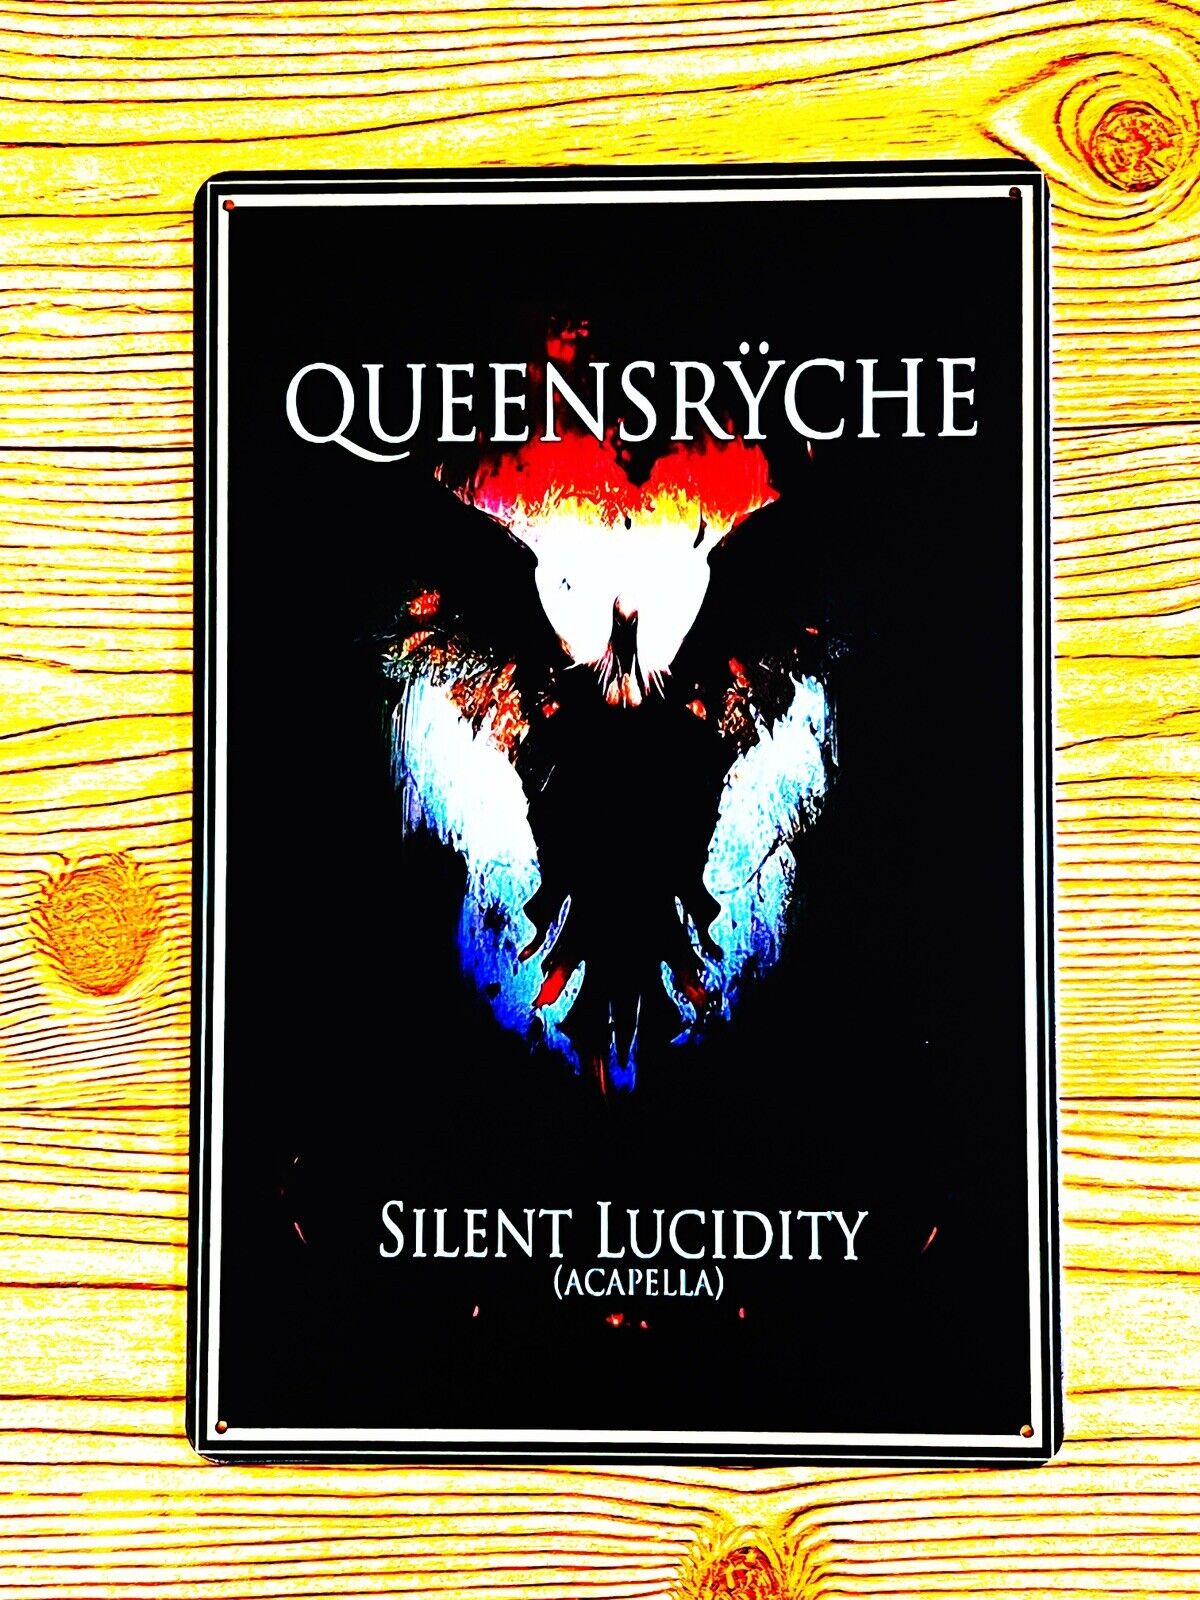 QUEENSRYCHE SILENCE LUCIDITY POSTER TIN METAL SIGN